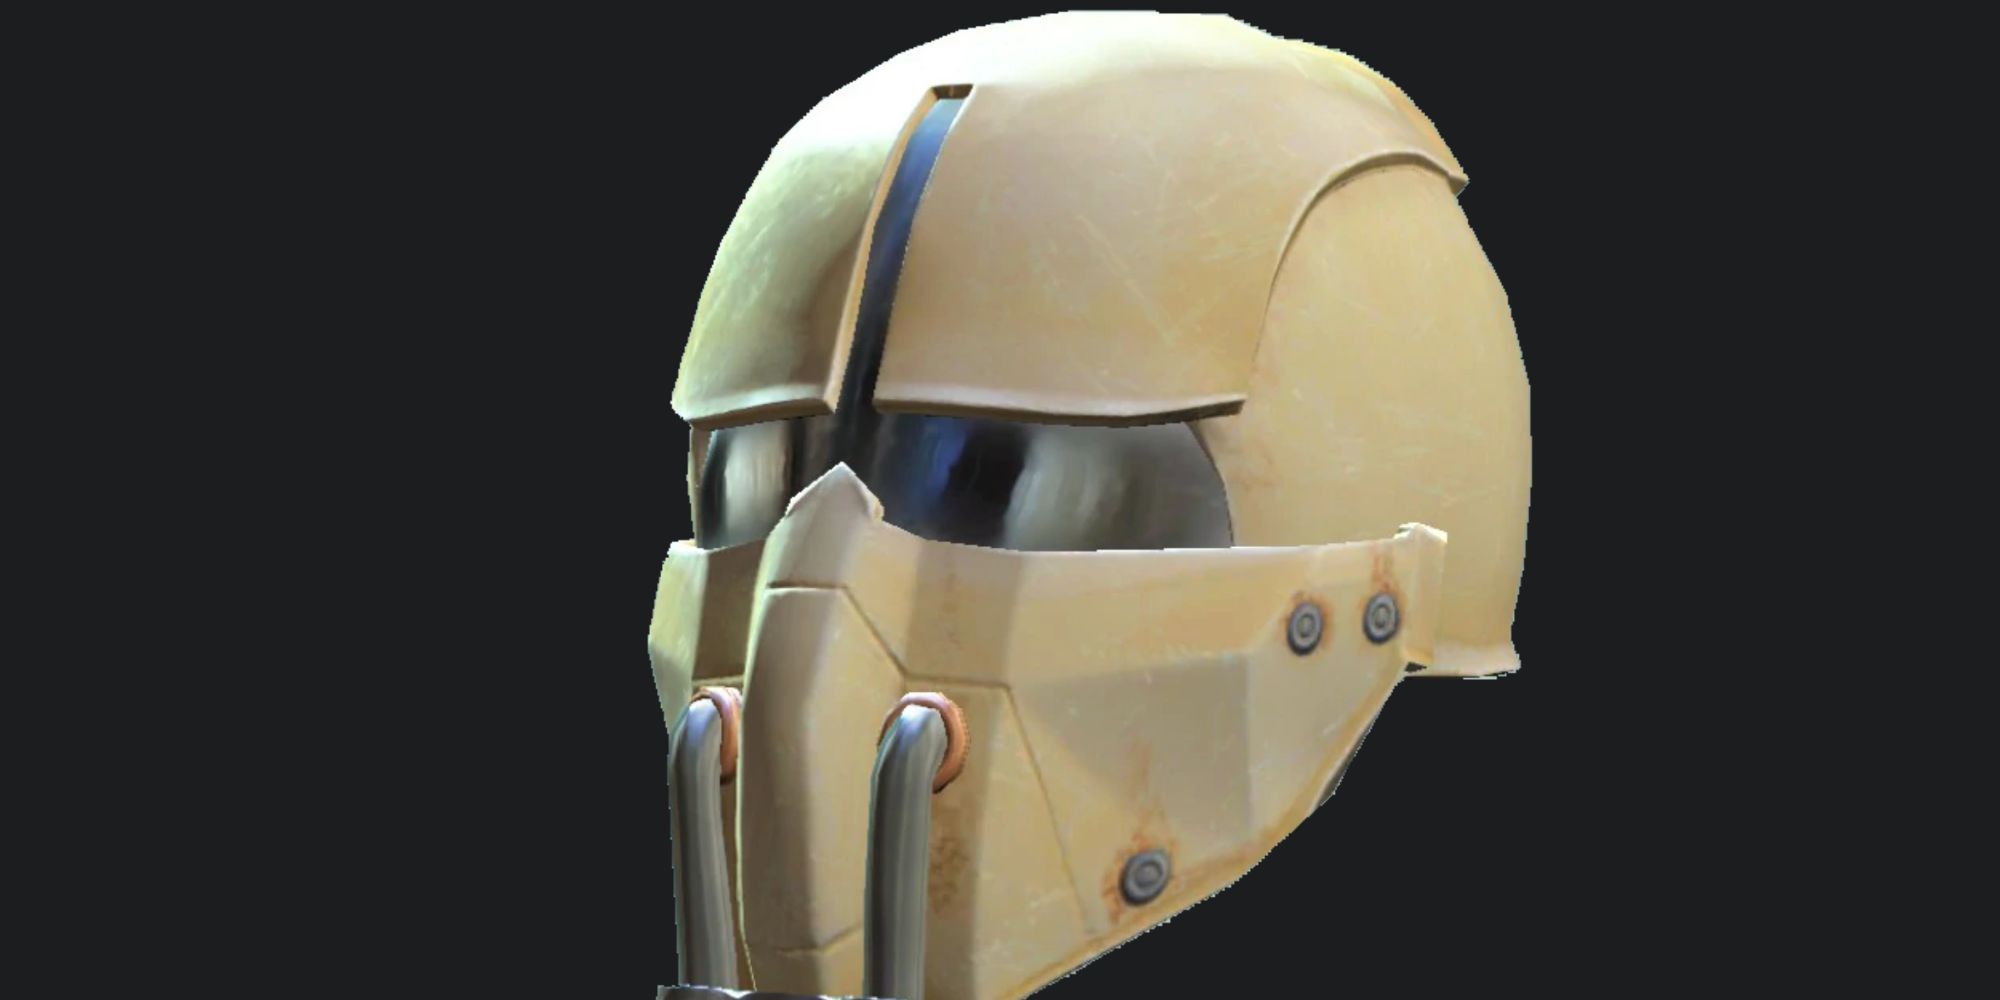 Fallout 4 Synth Field Helmet With A Dark Background